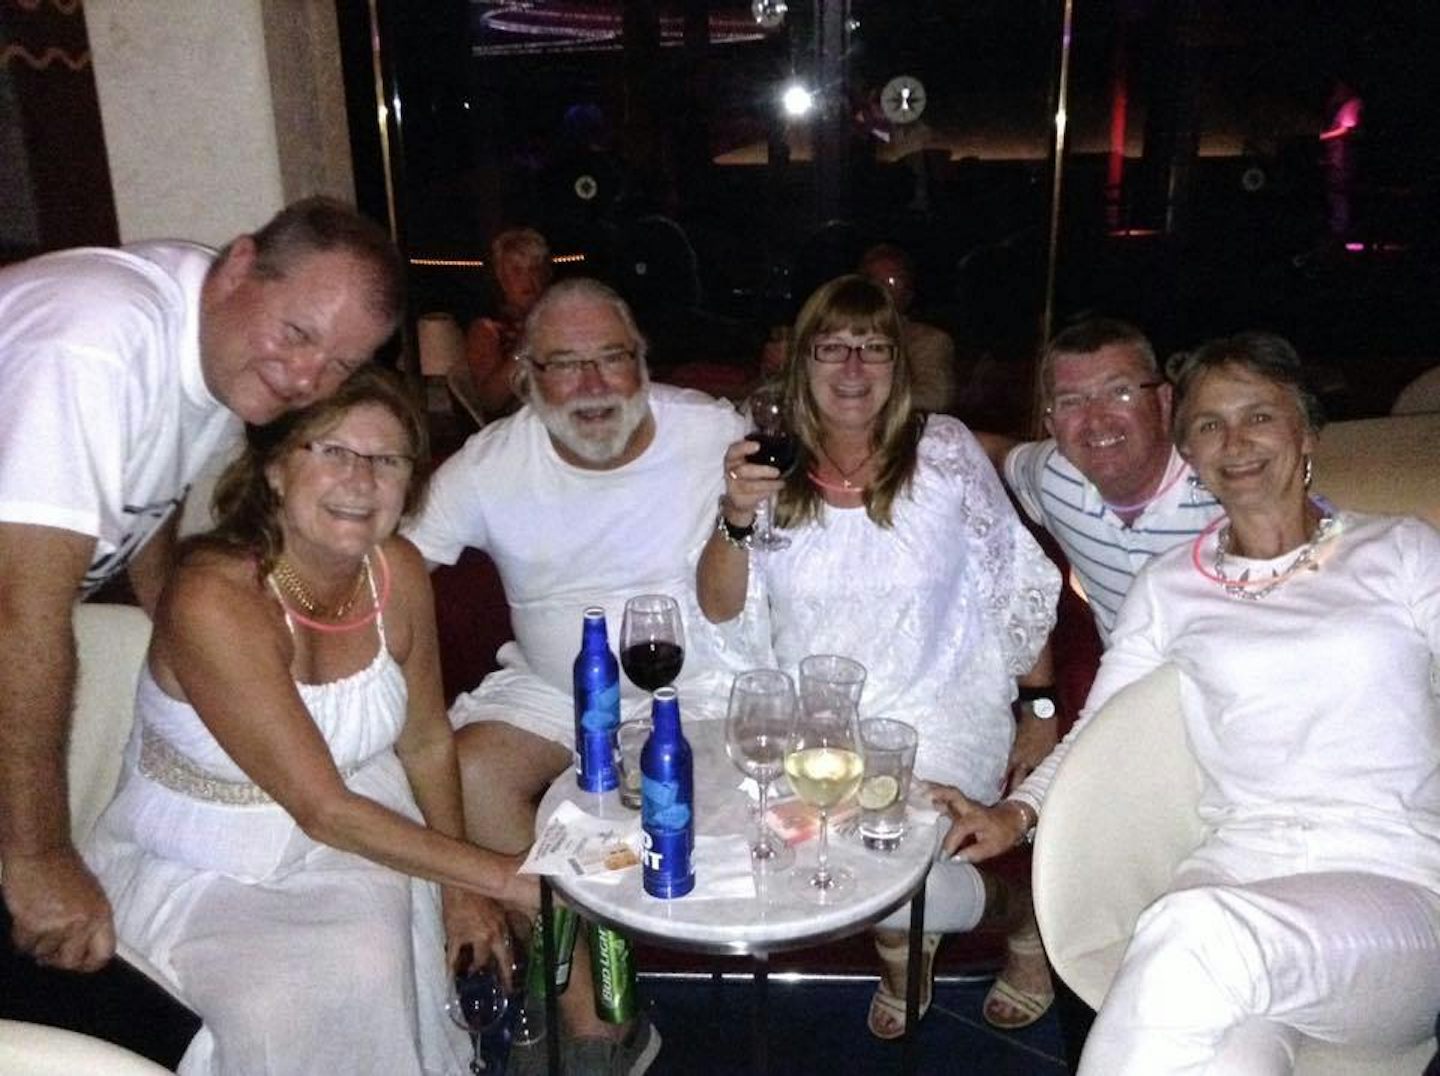 White night - with great friends!